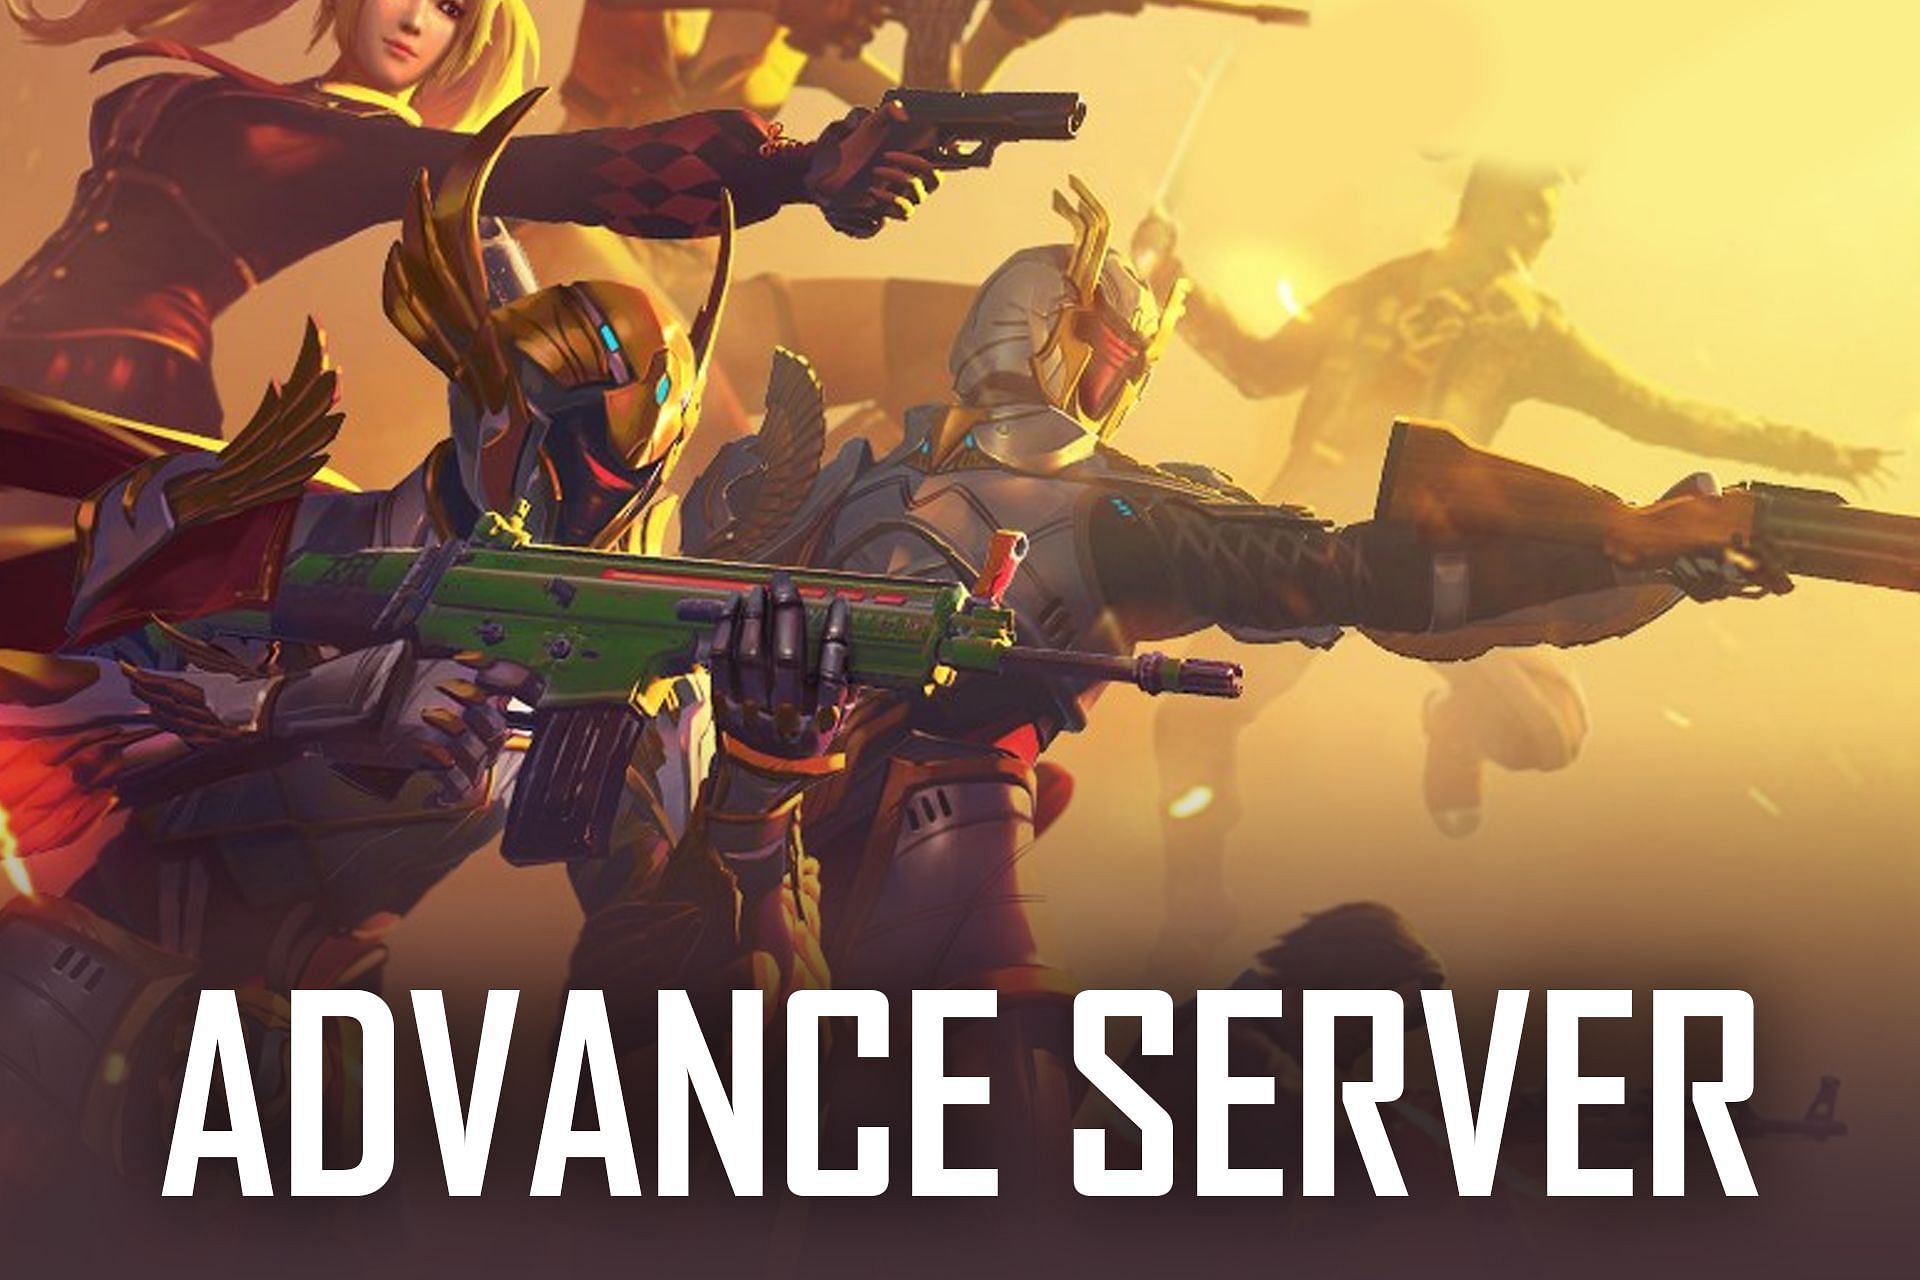 Advance Server of the game will be launching tomorrow (Image via Sportskeeda)